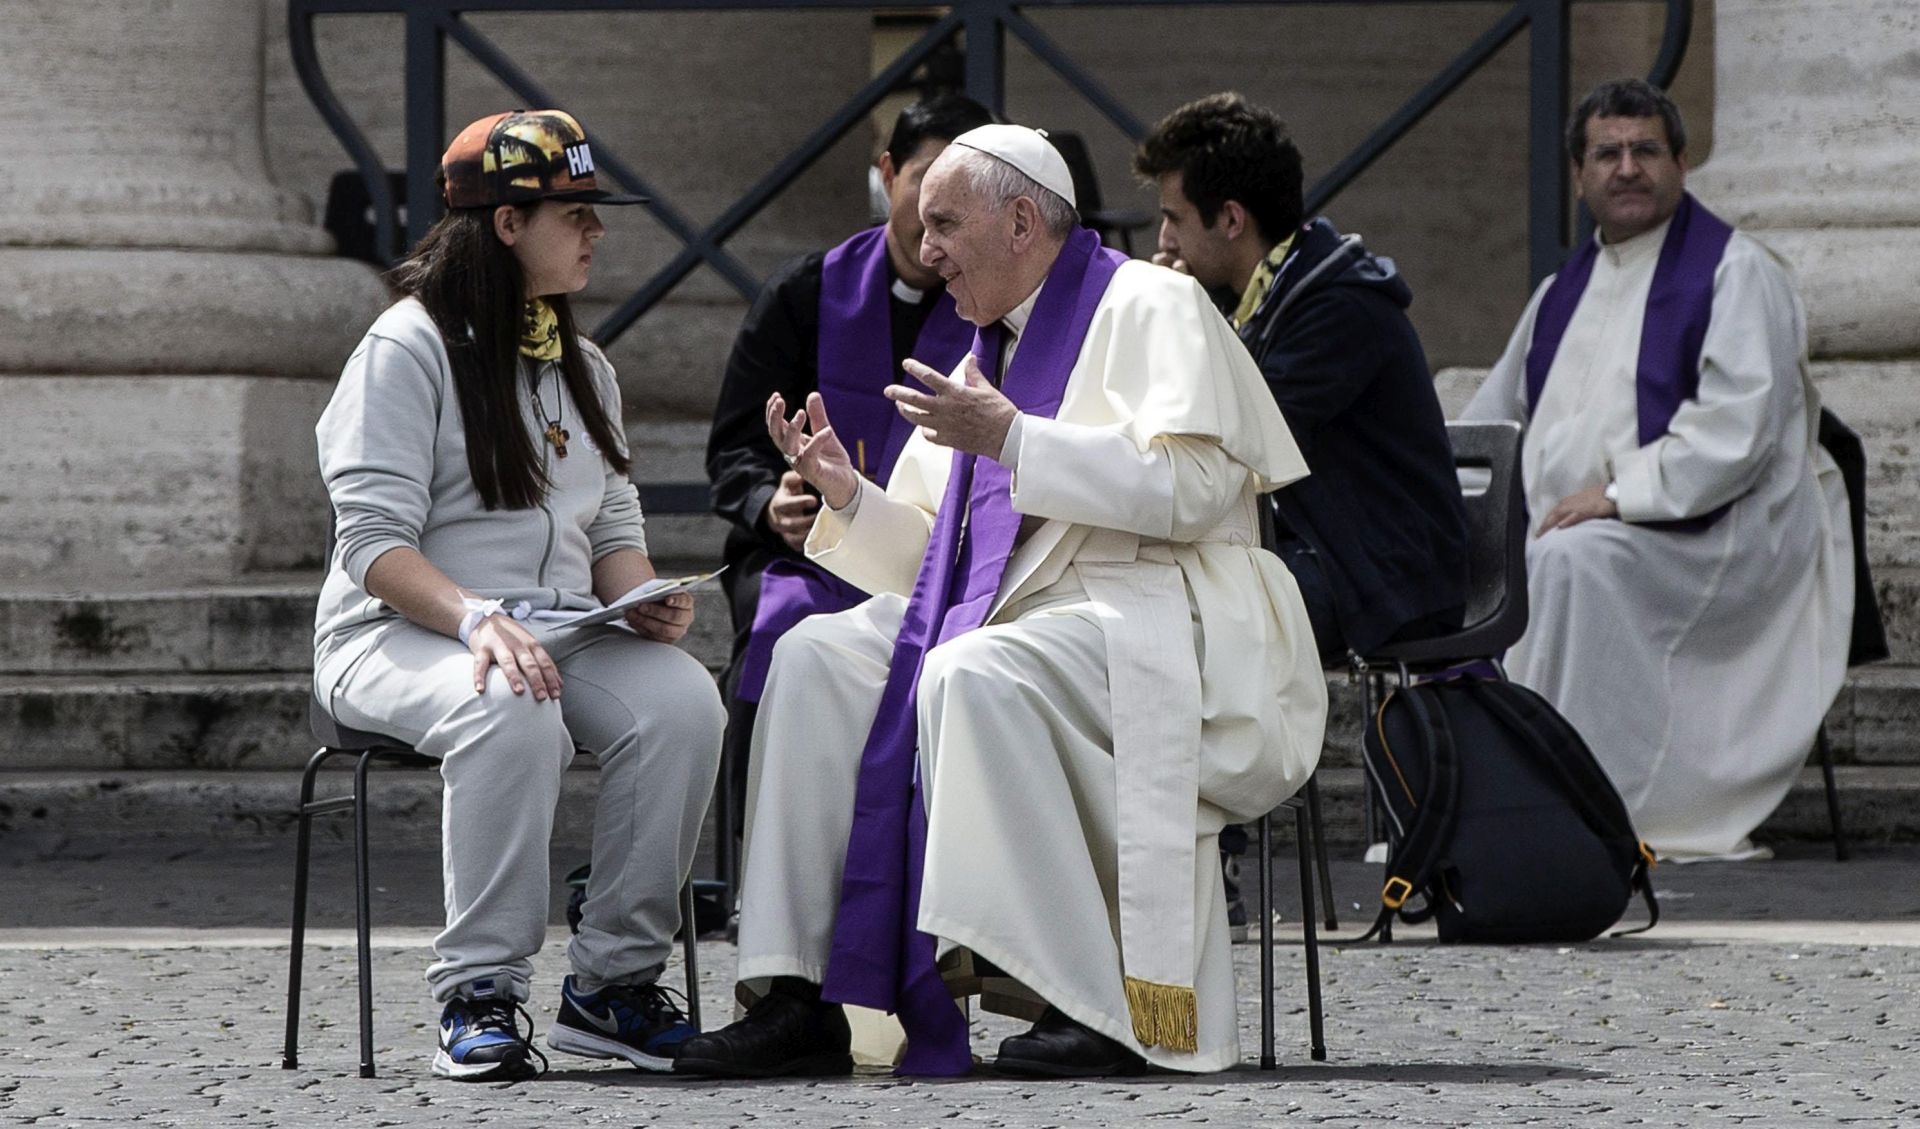 epa05273334 Pope Francis hears confessions of young faithfuls during the Jubilee for Teens in Saint Peter's Square, Vatican, 23 April 2016. According to Vatican radio the Pope listened to confessions for more than an hour and was joined in the square by more than 150 priests to hear confessions.  EPA/ANGELO CARCONI